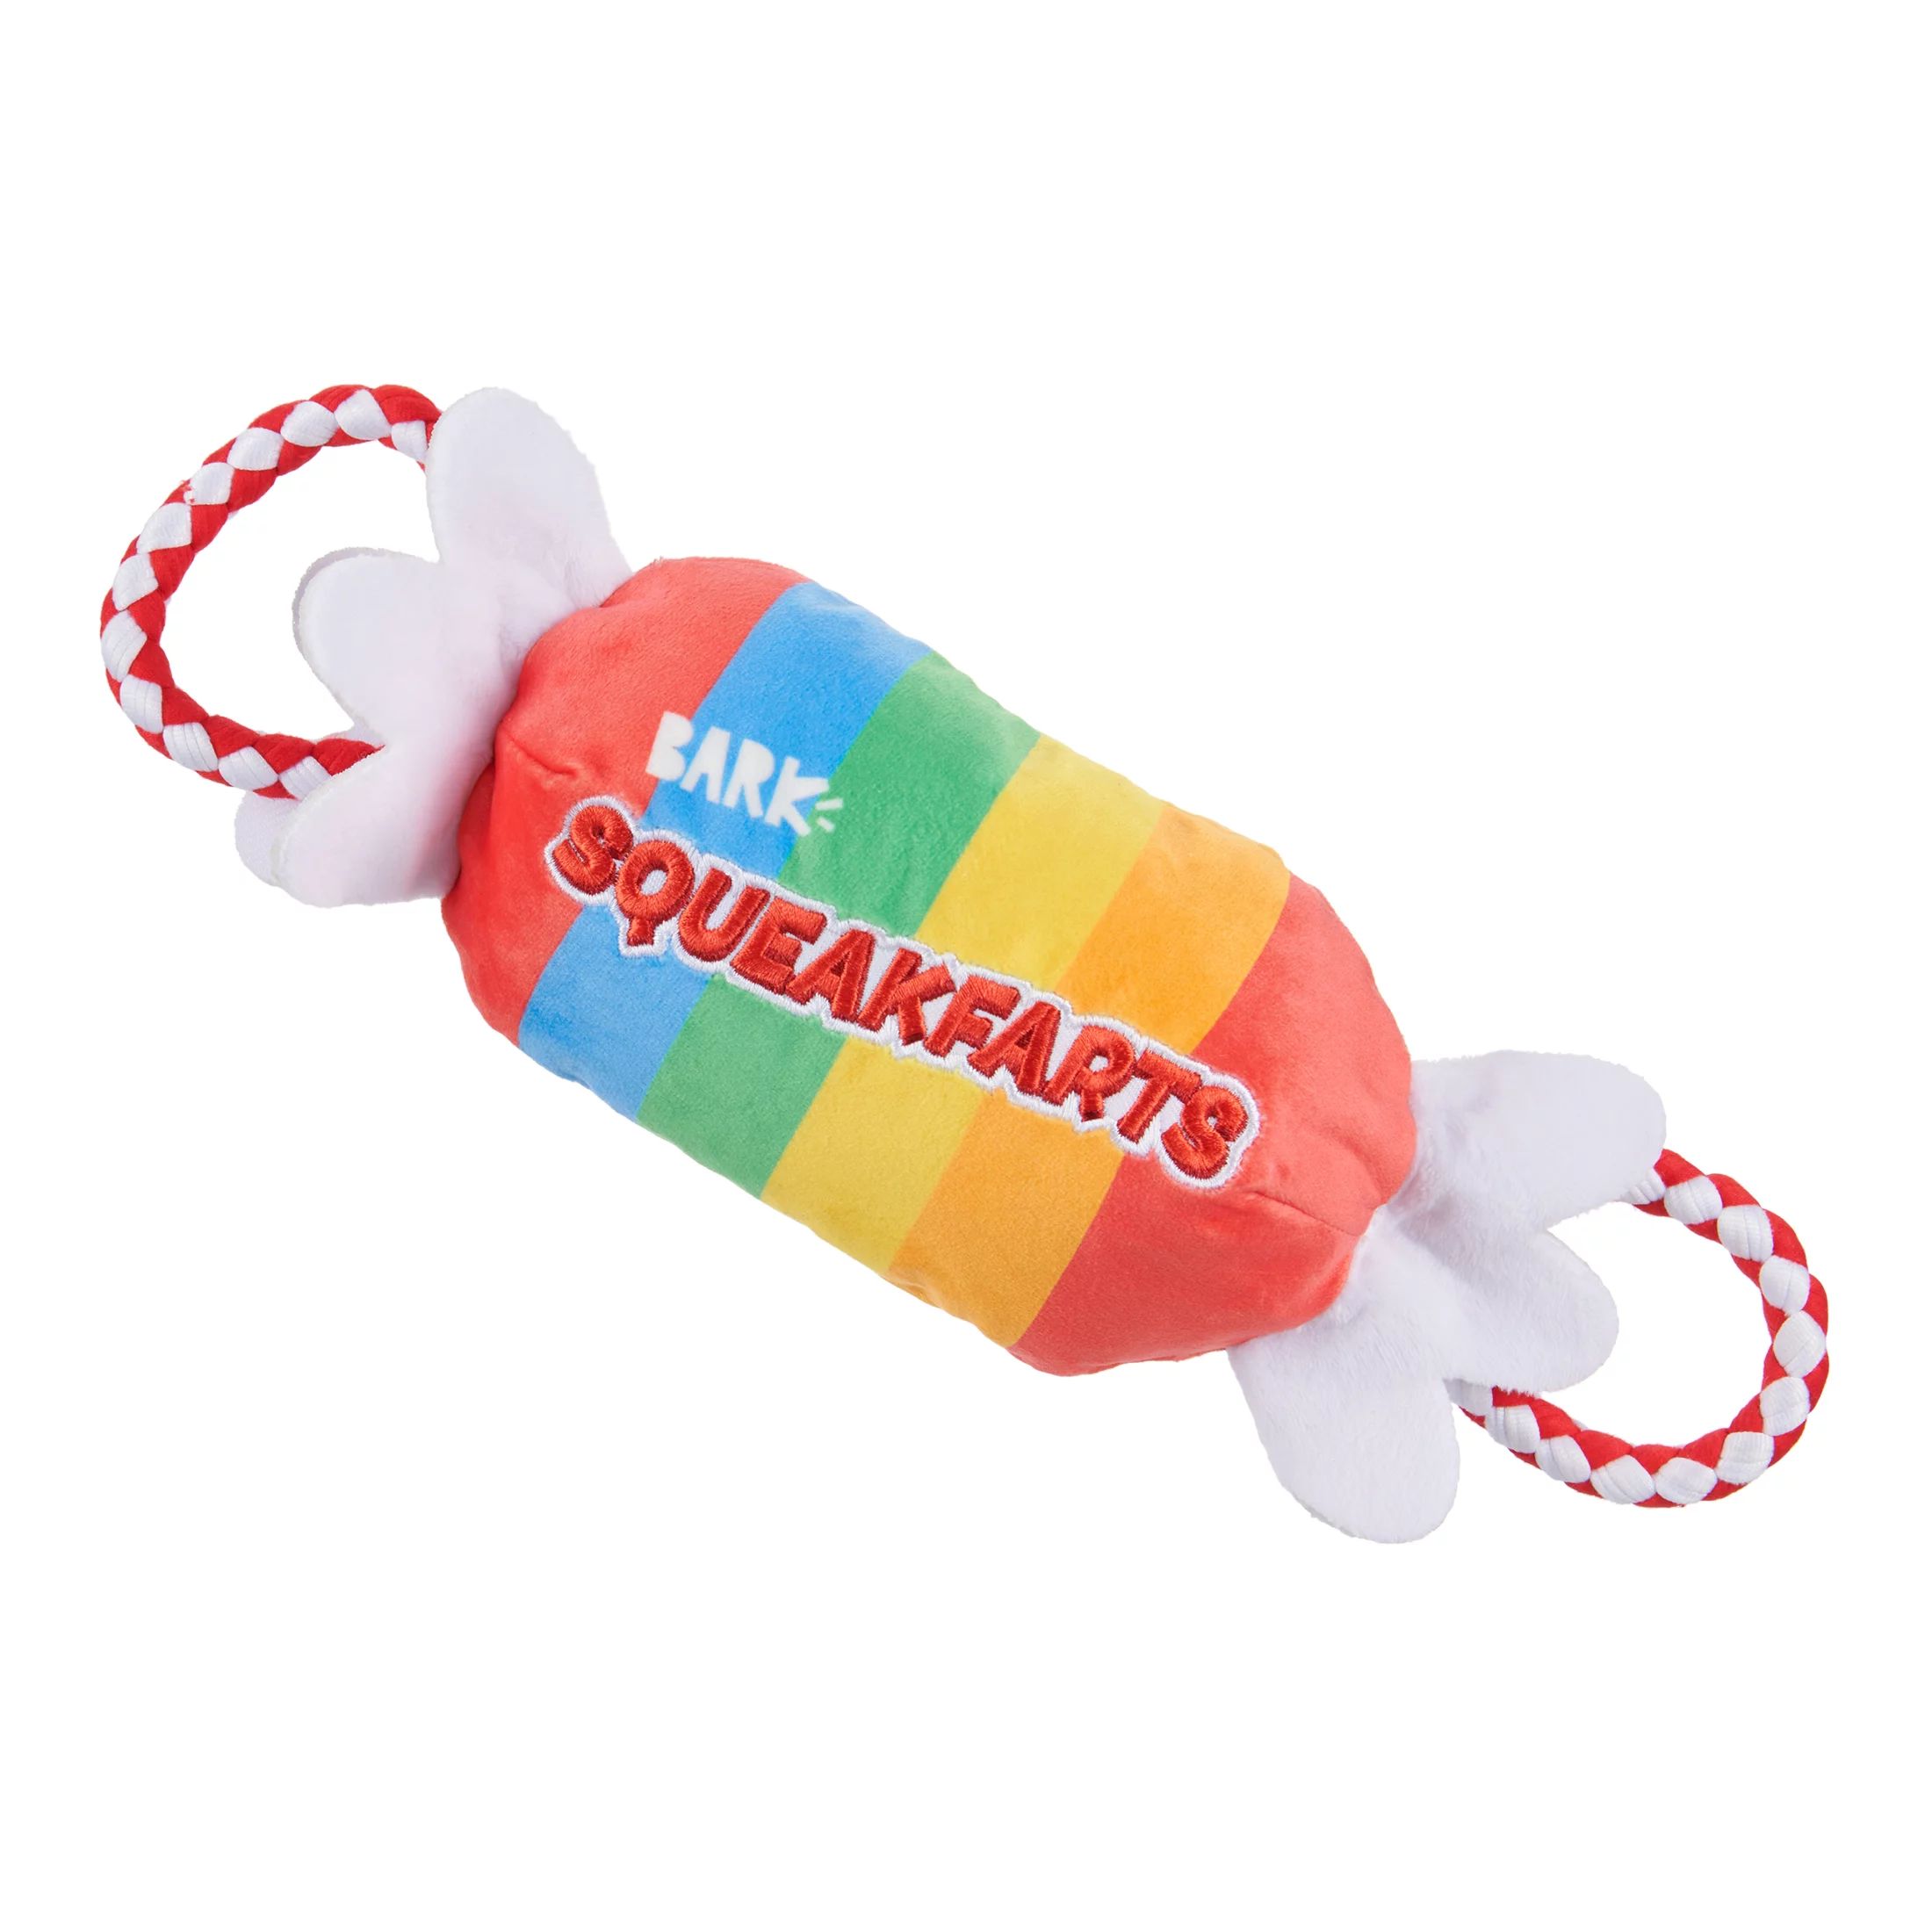 BARK SqueakFarts Halloween Candy Dog Toy for Tug-O-War, For S-M Dogs | Walmart (US)